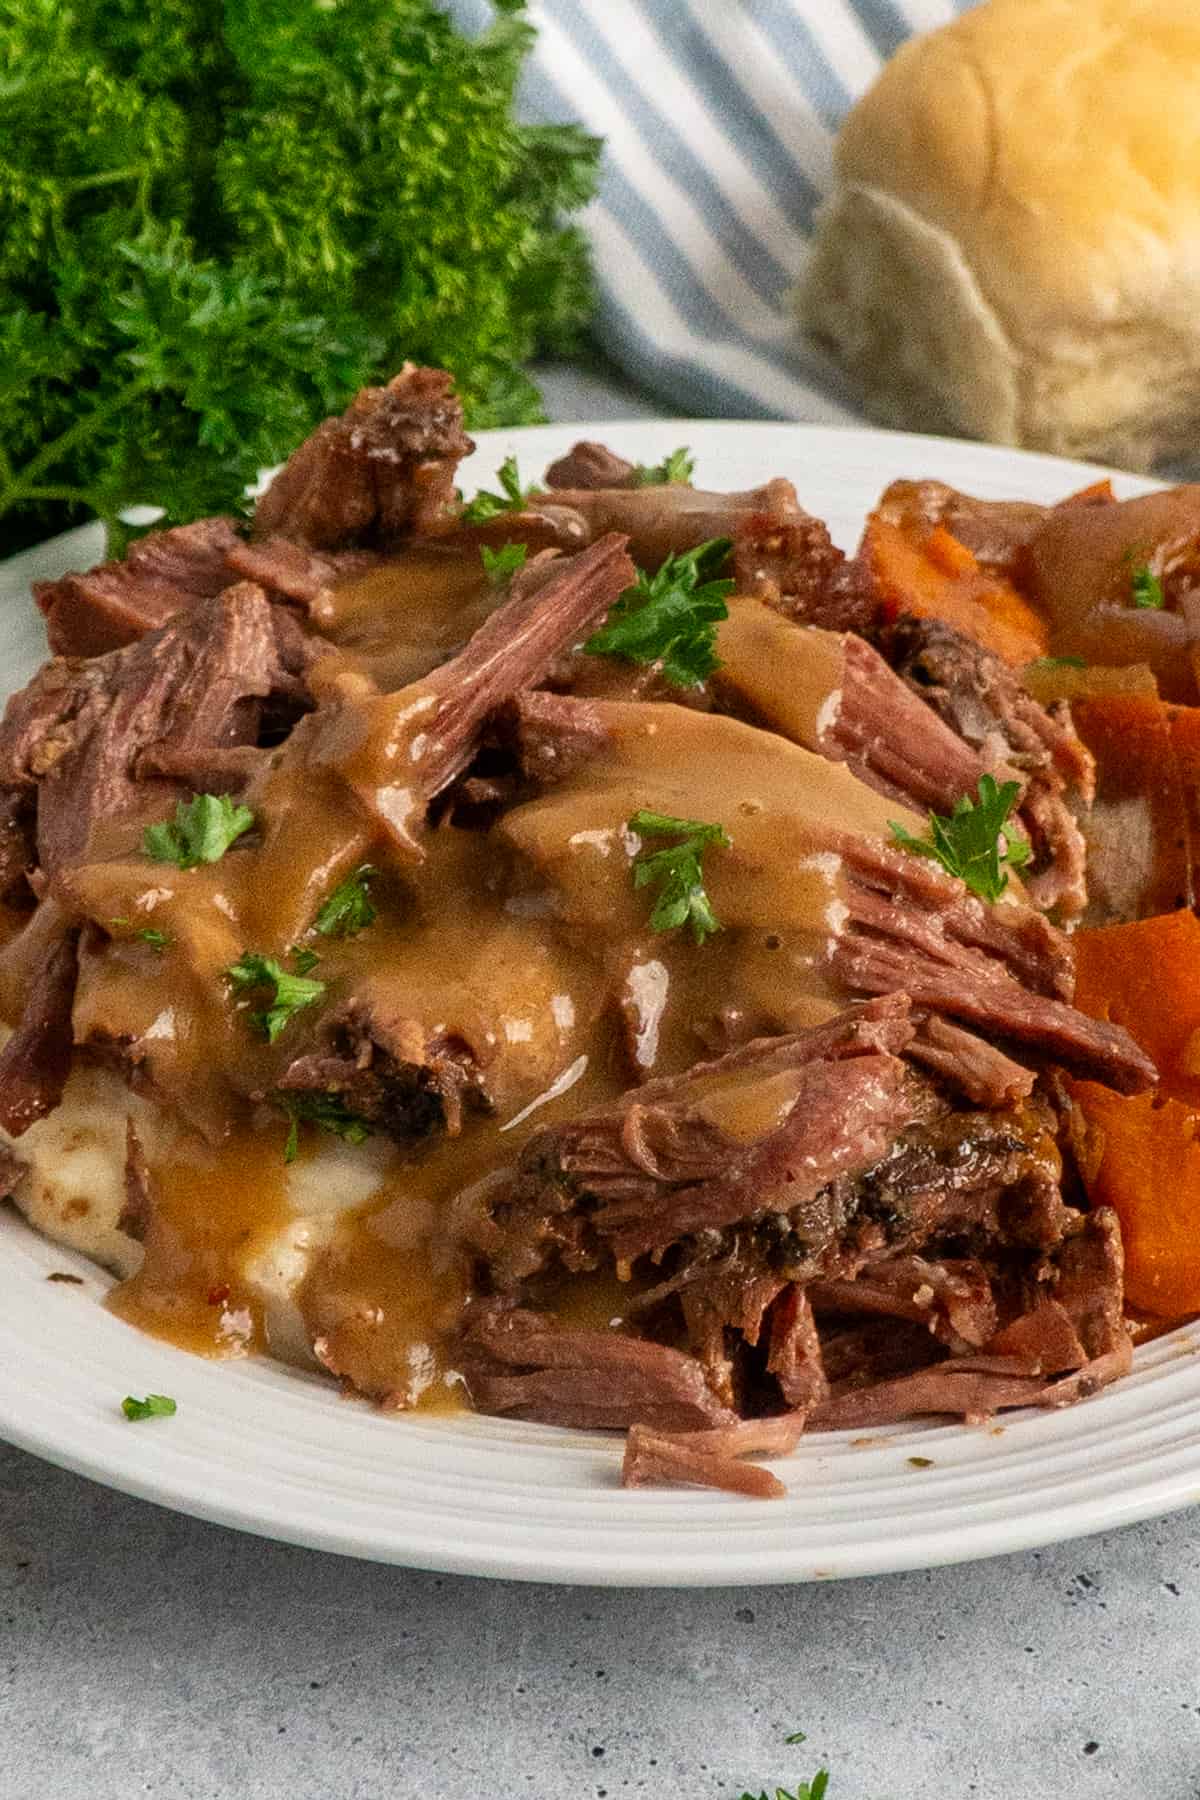 Sideview of a 3 packet pot roast on a plate of mashed potatoes.